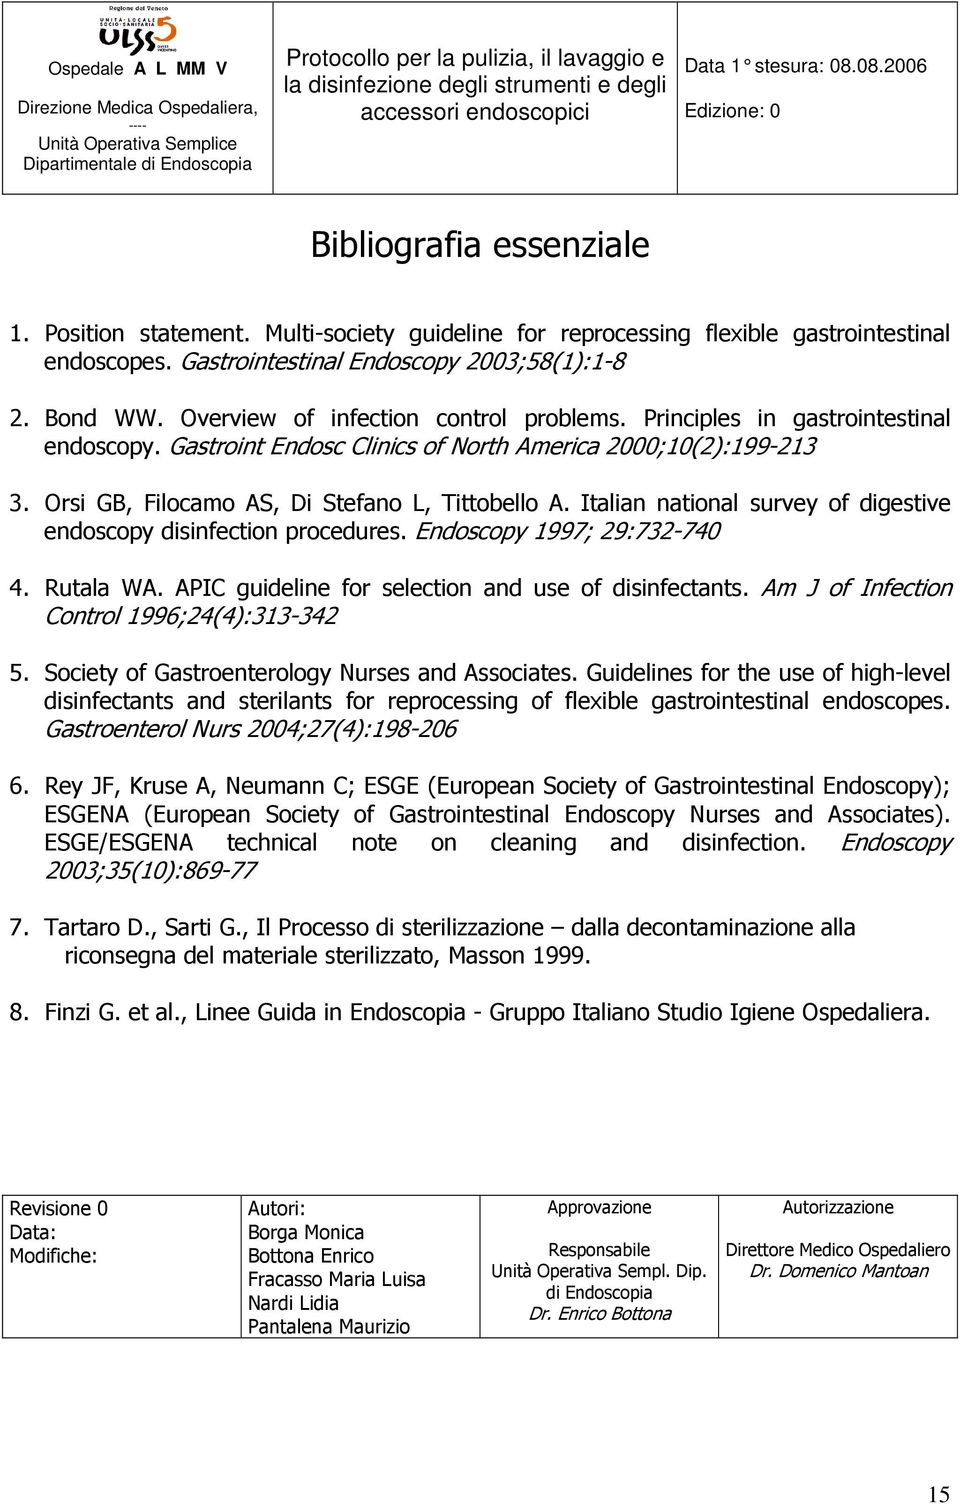 Italian national survey of digestive endoscopy disinfection procedures. Endoscopy 1997; 29:732-740 4. Rutala WA. APIC guideline for selection and use of disinfectants.